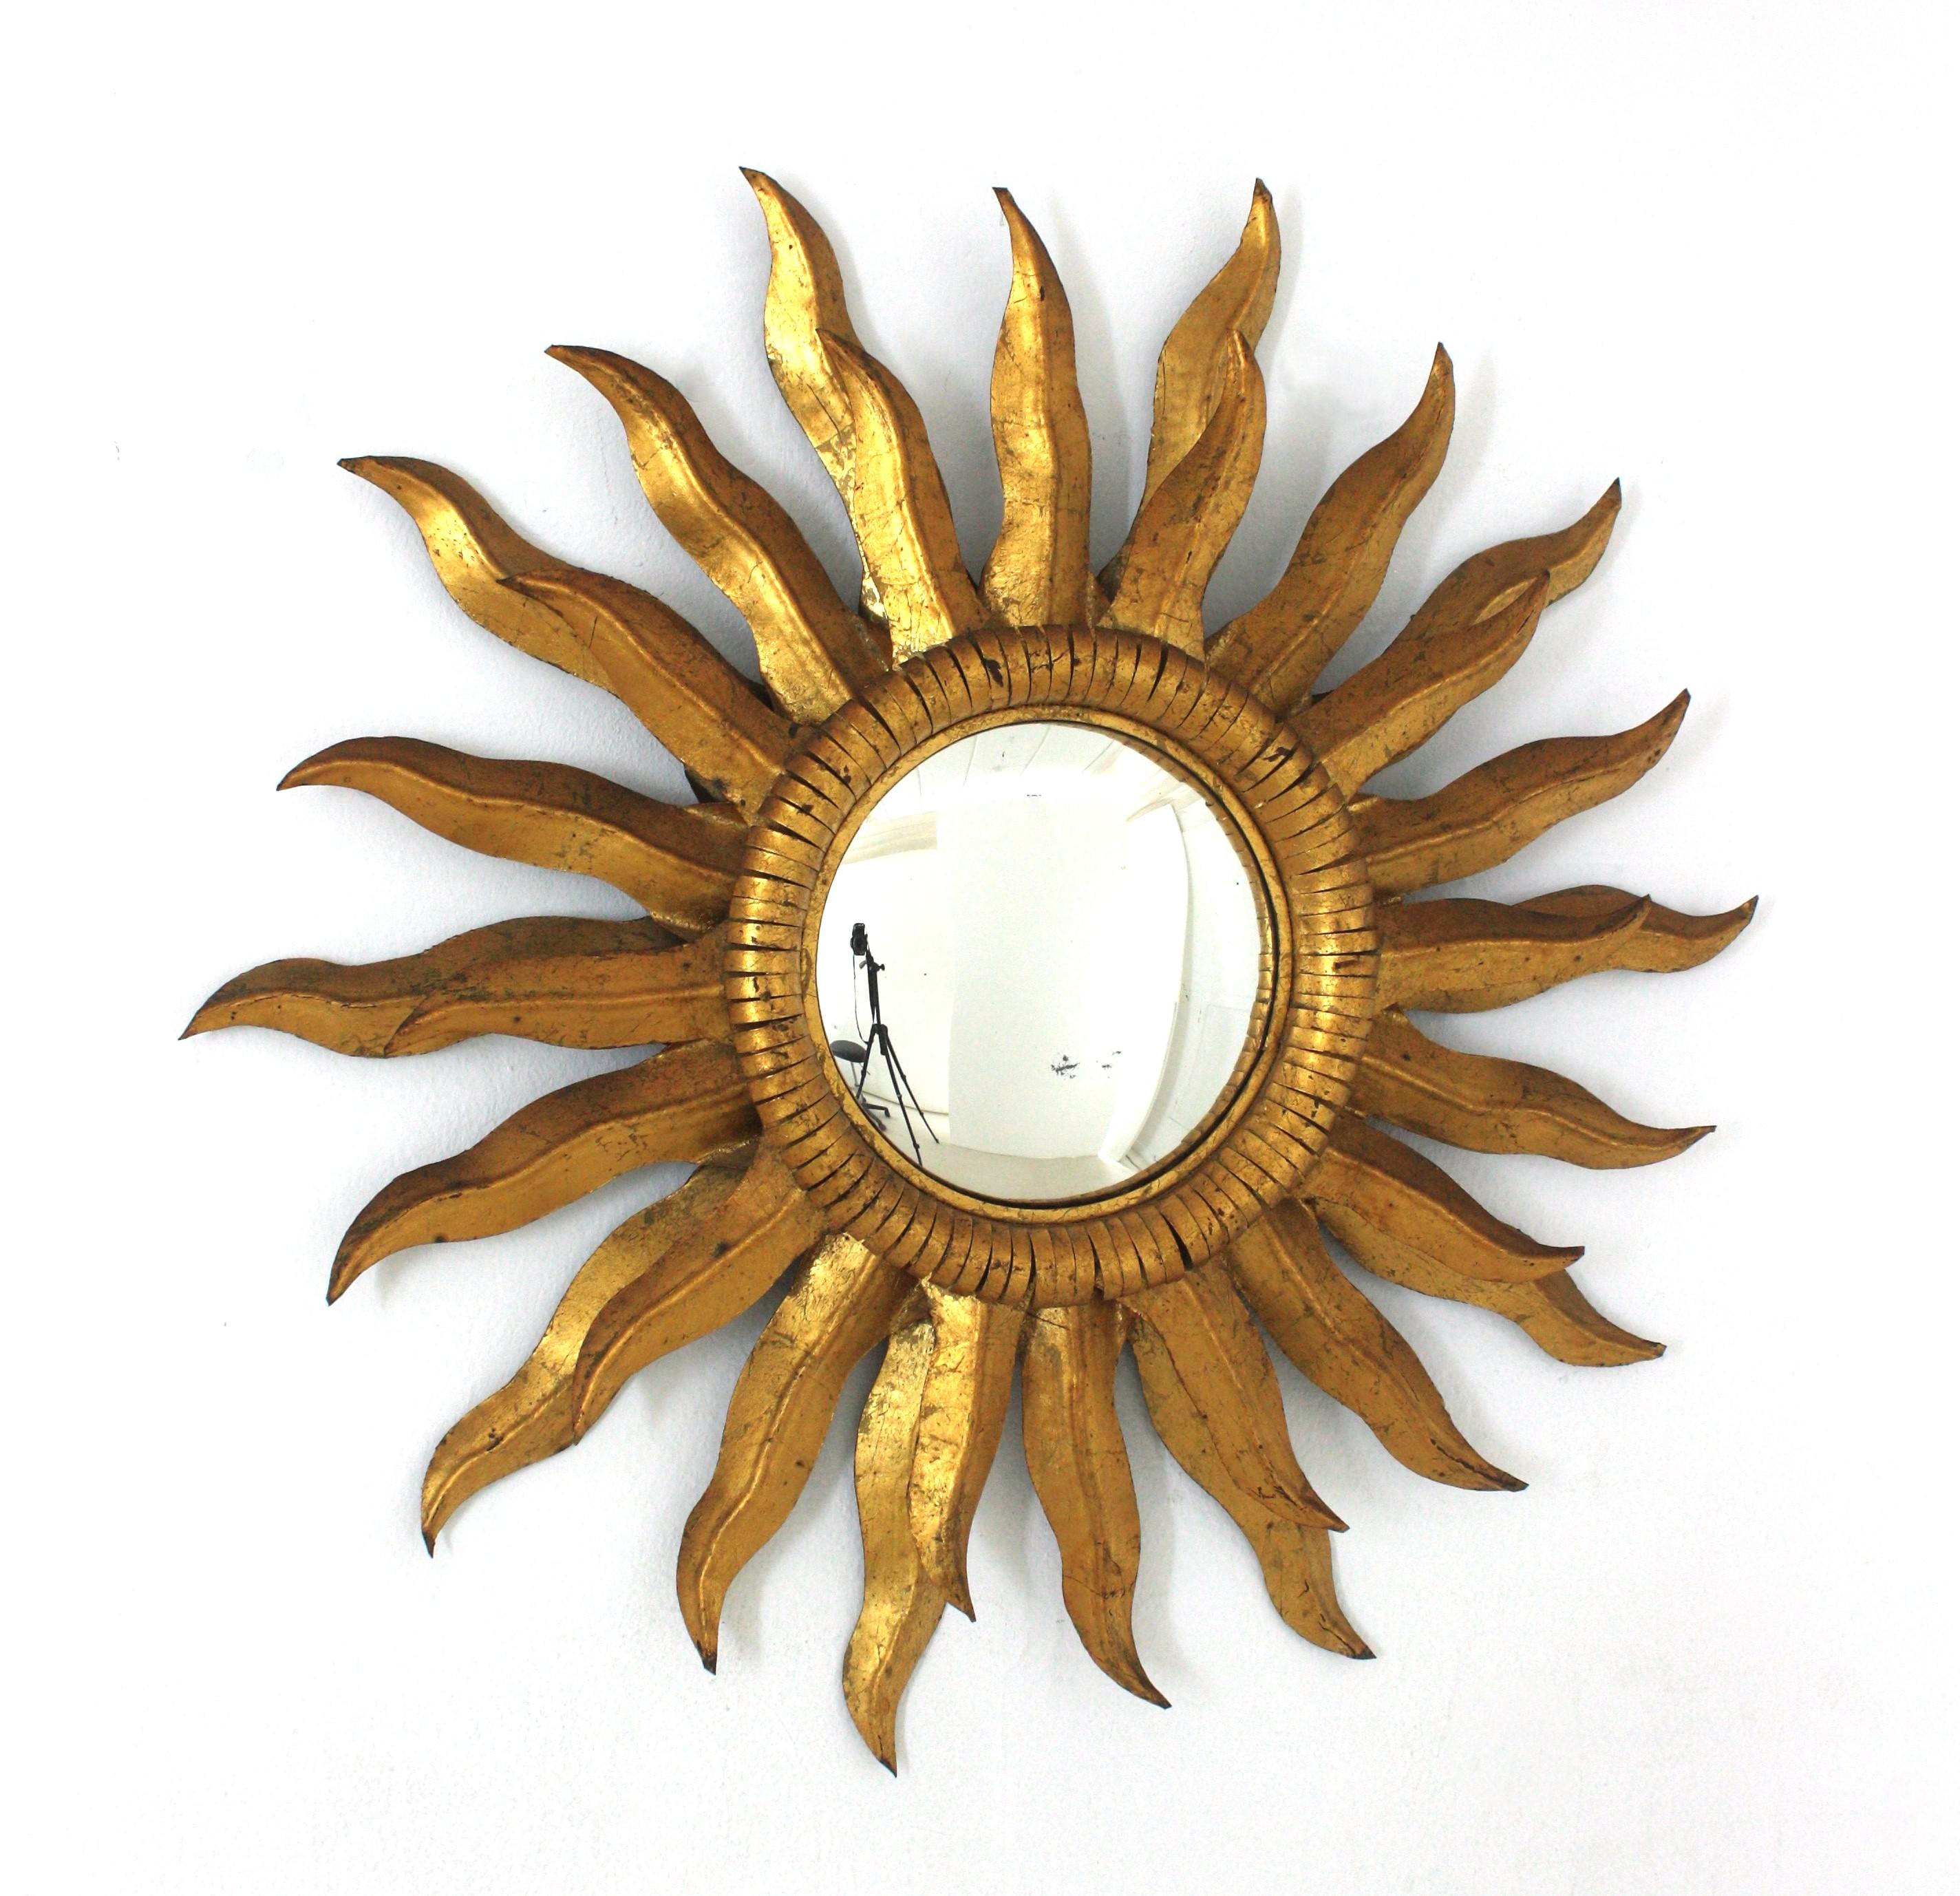 Hand-Crafted Gilt Metal Convex Sunburst Mirror, Iron, Gold Leaf
Eye-catching Mid-Century Hollywood Regency sunburst mirror in gilt iron, Spain 1950s
Double layered frame, convex glass and gilded finish in gold leaf. It has a glamourous patina